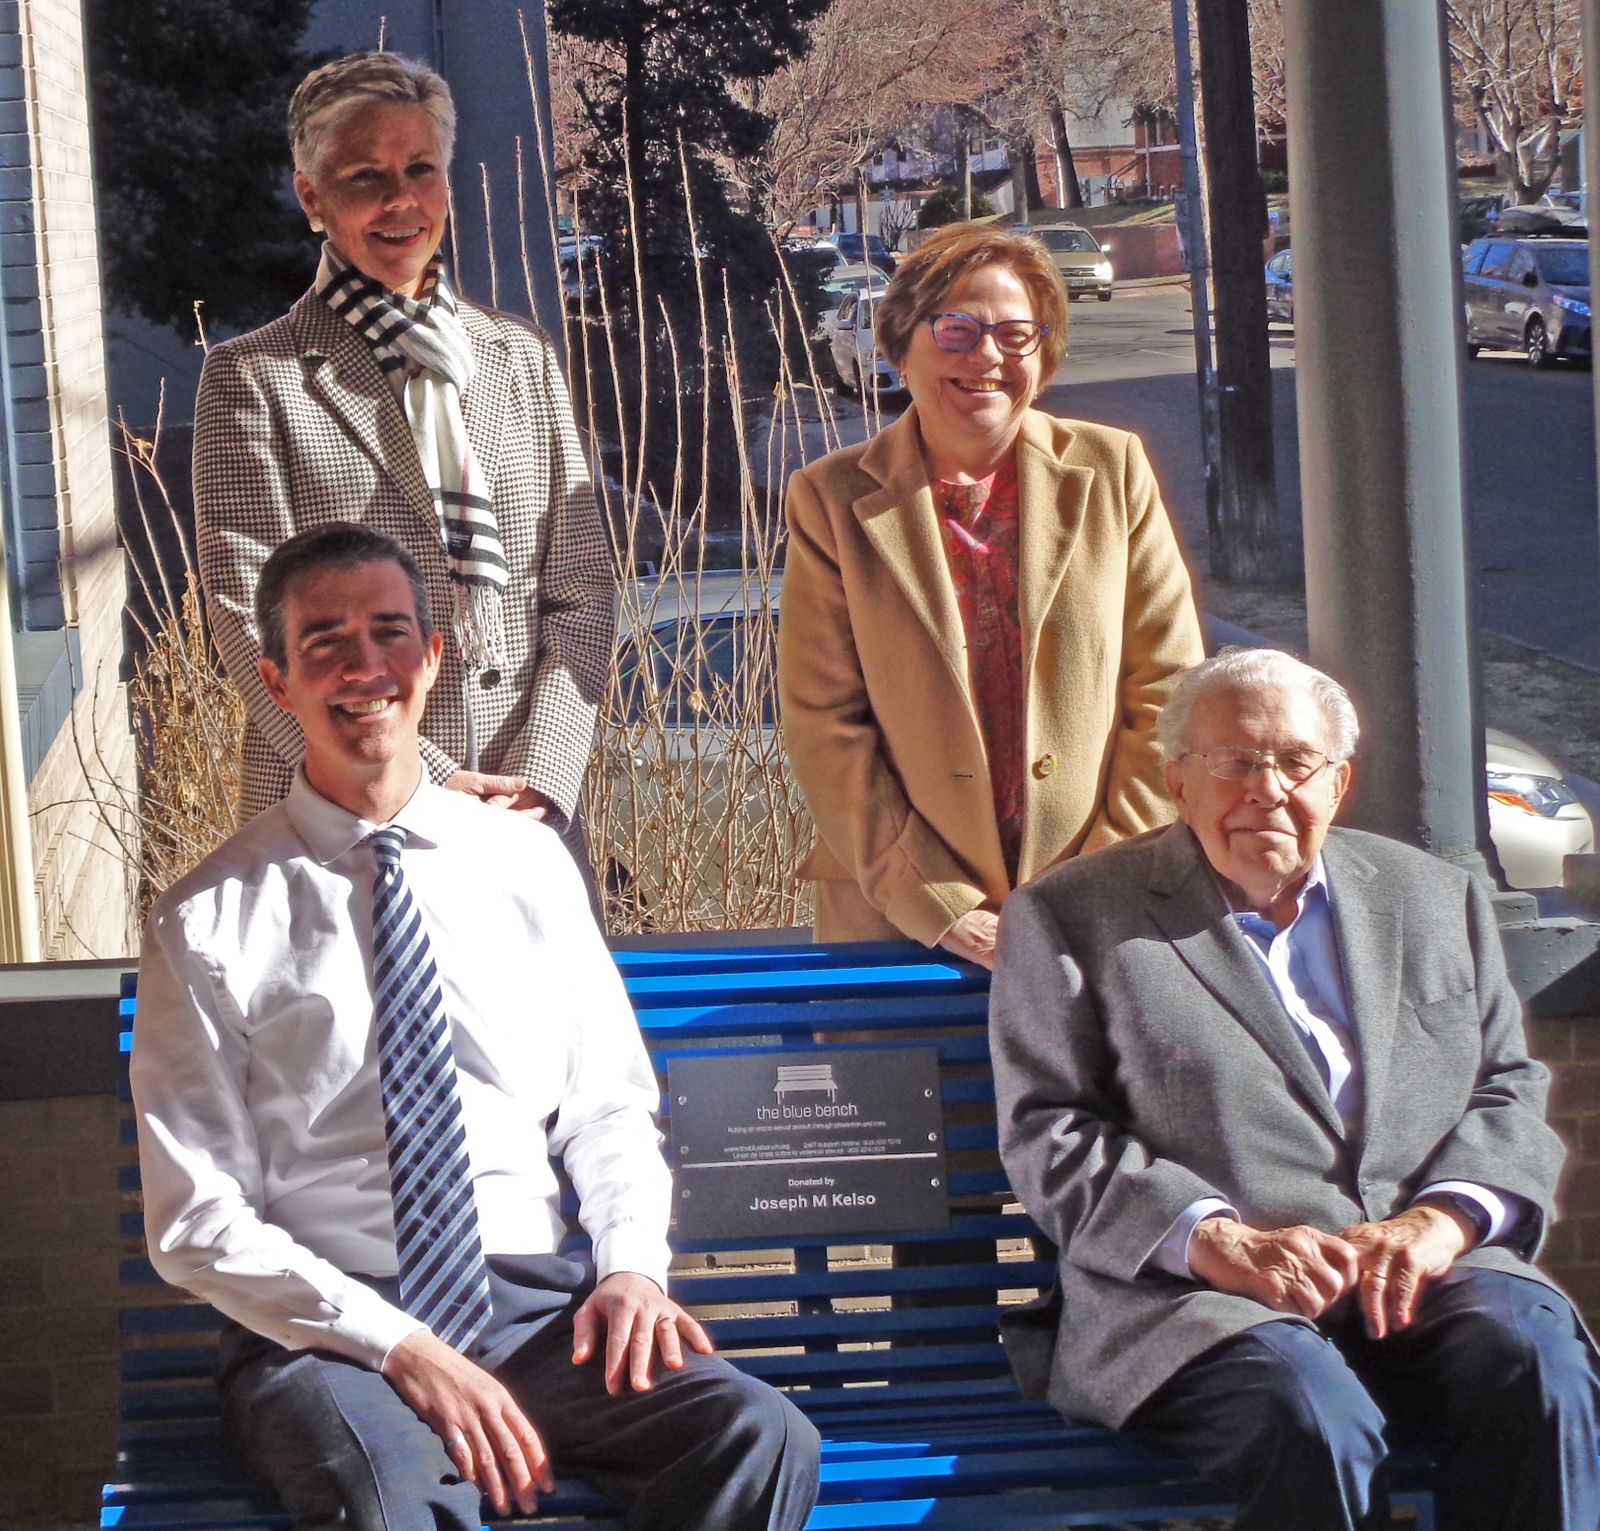 Photo of leadership members from TheBlueBench organization sitting or standing near a blue bench.